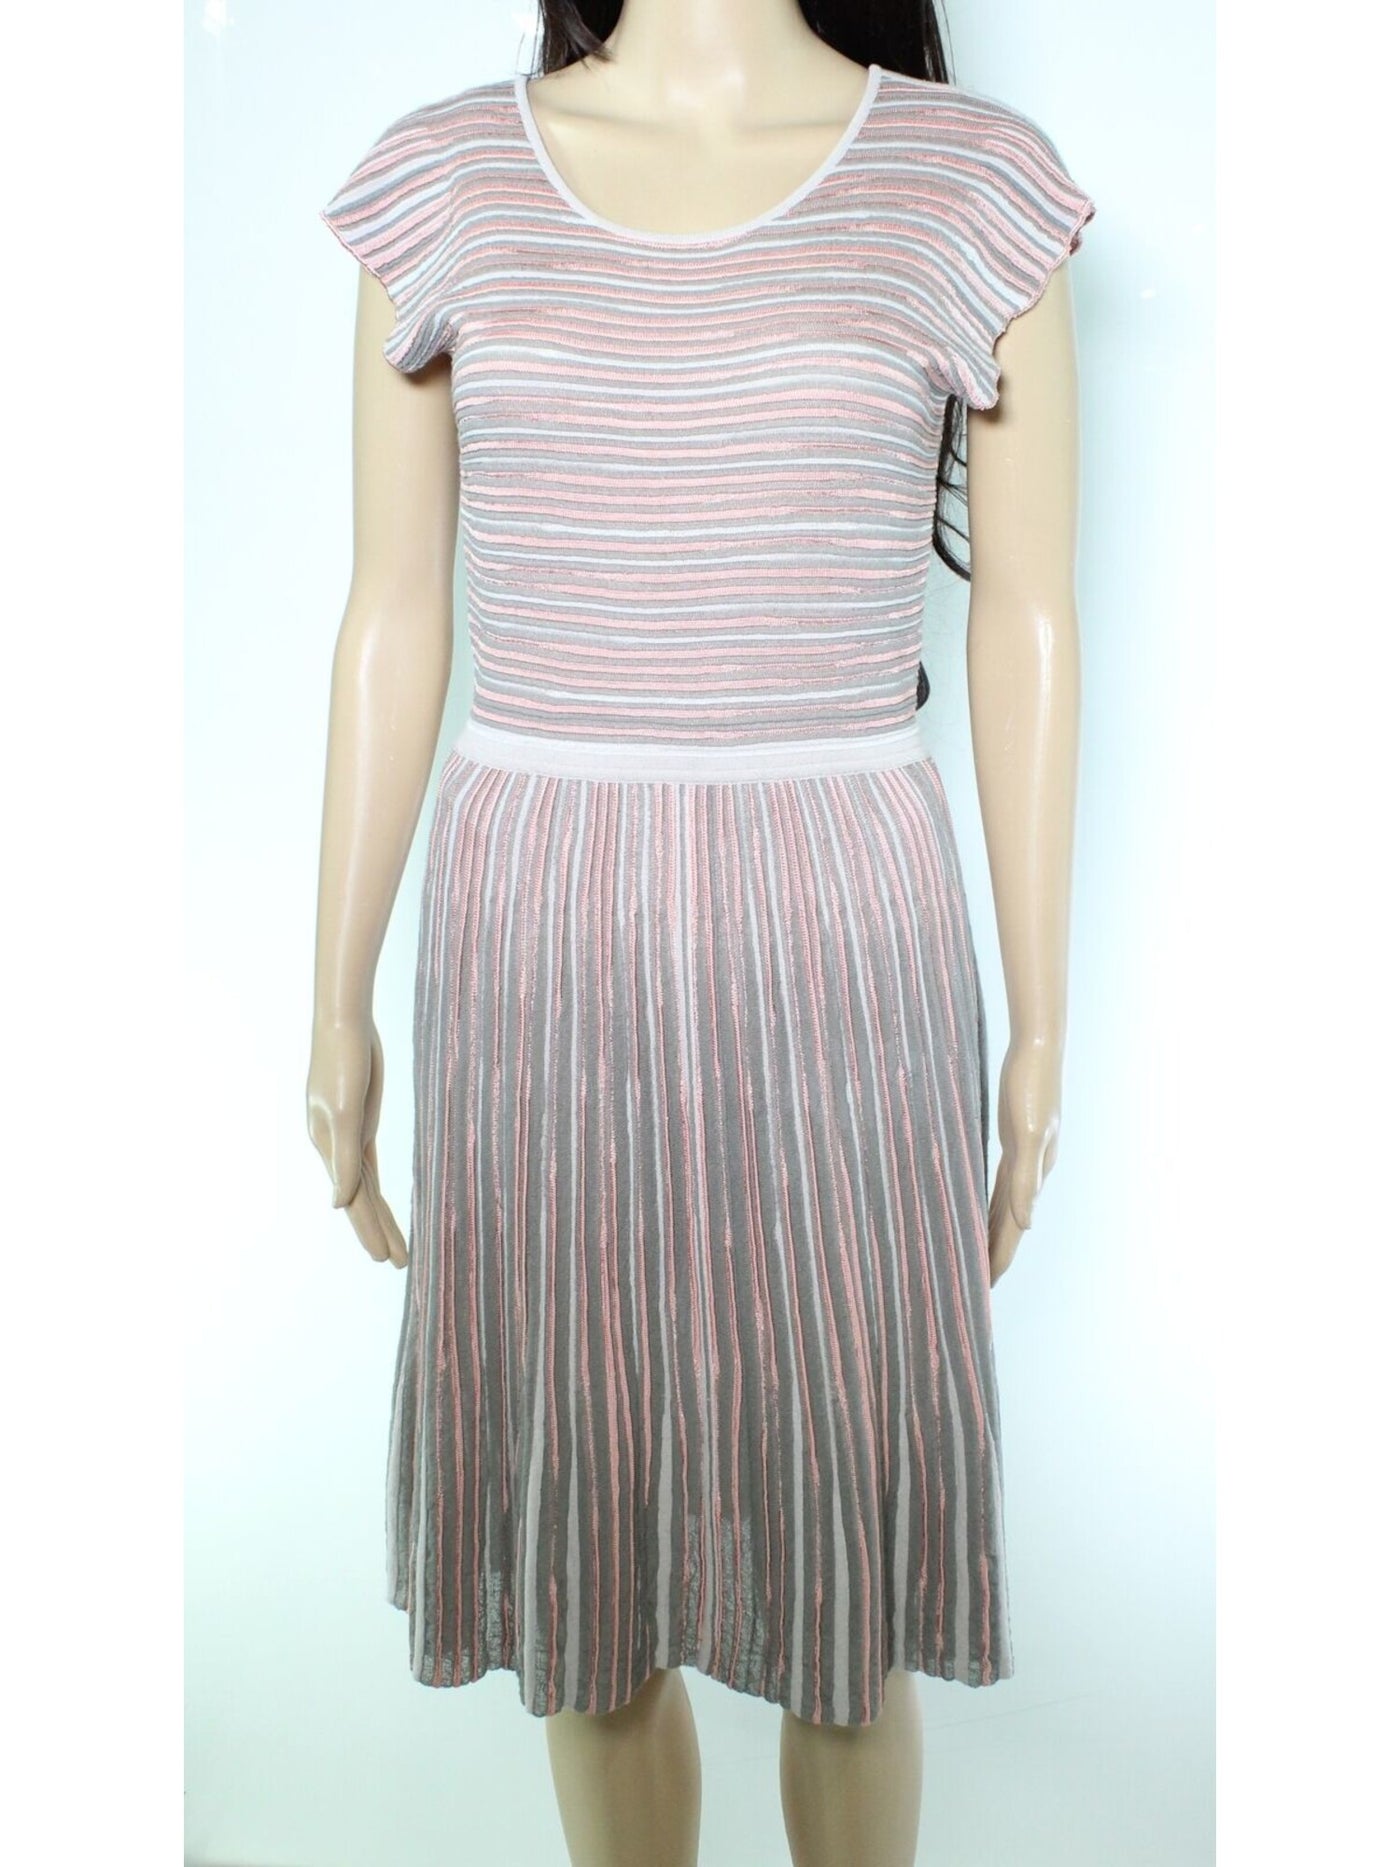 EMPORIO ARMANI Womens Pink Textured Pullover Styling Striped Sleeveless Scoop Neck Knee Length Wear To Work Fit + Flare Dress 38